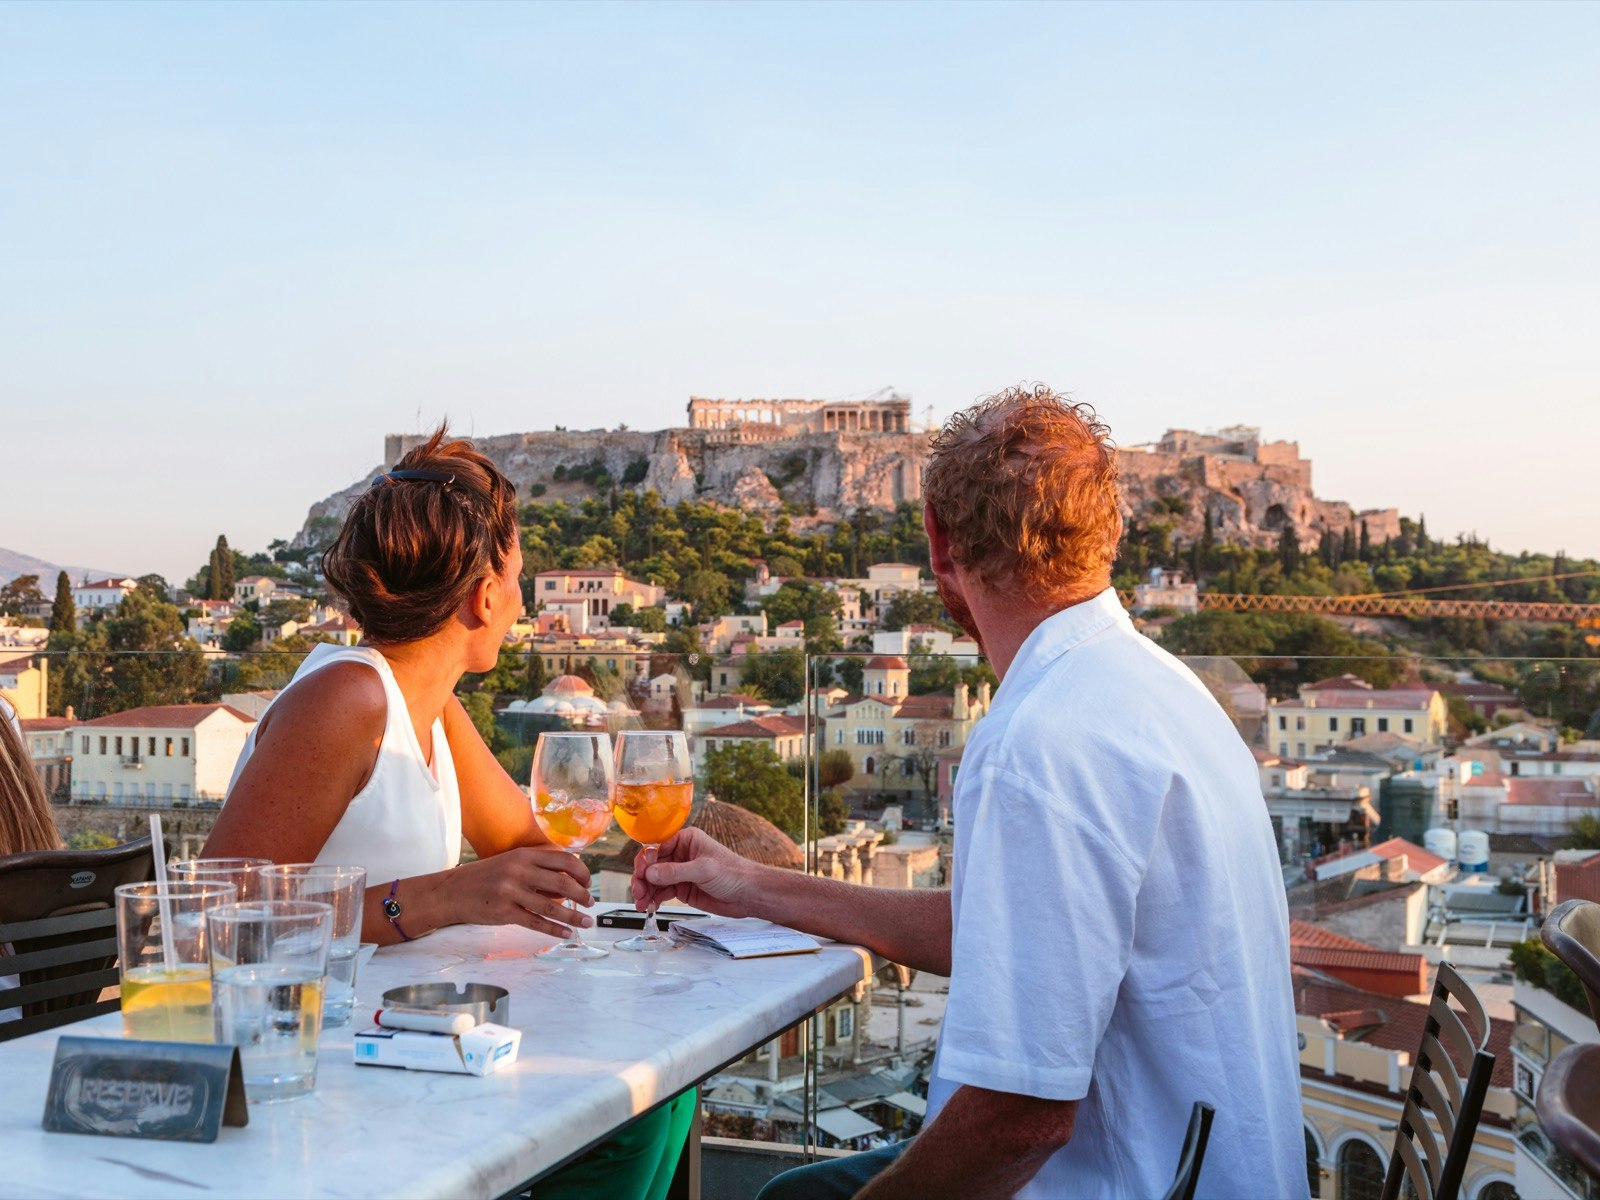 Two people look at the Acropolis while holding their glasses together